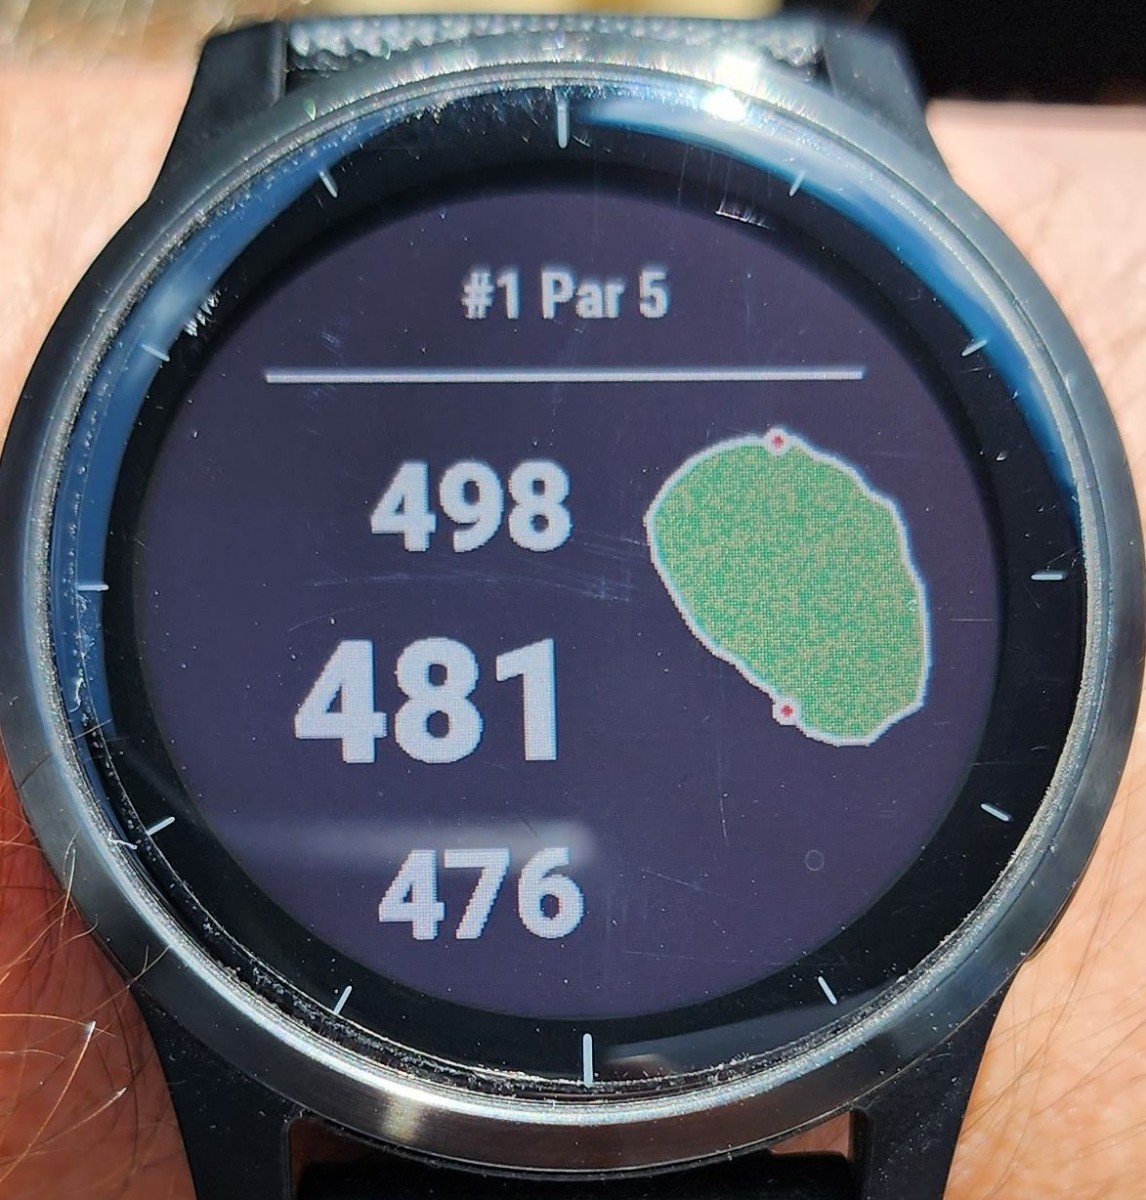 Garmin Vivoactive 5 In-Depth Review: 19 New Features to Know